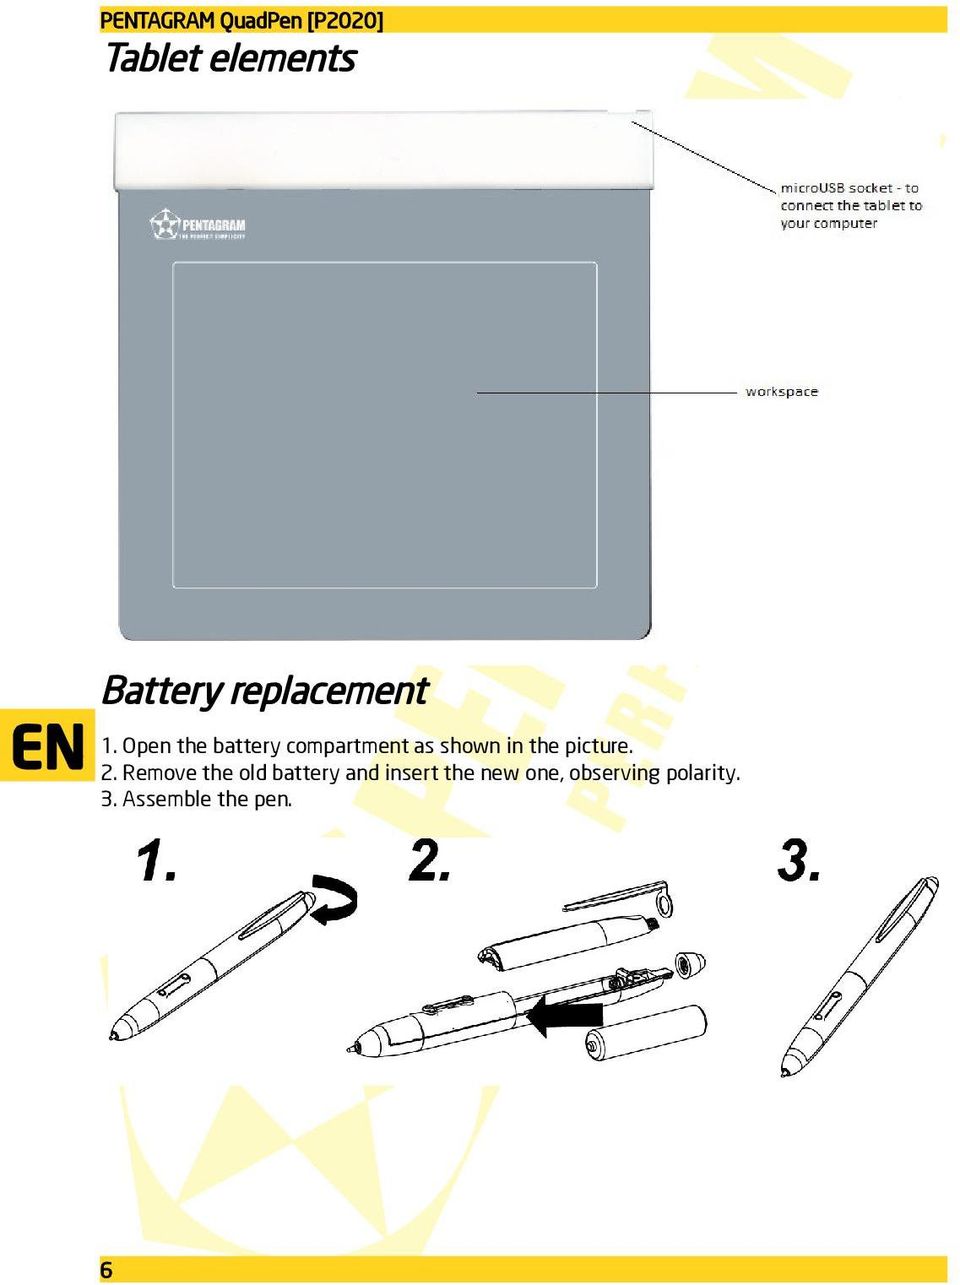 Open the battery compartment as shown in the picture.